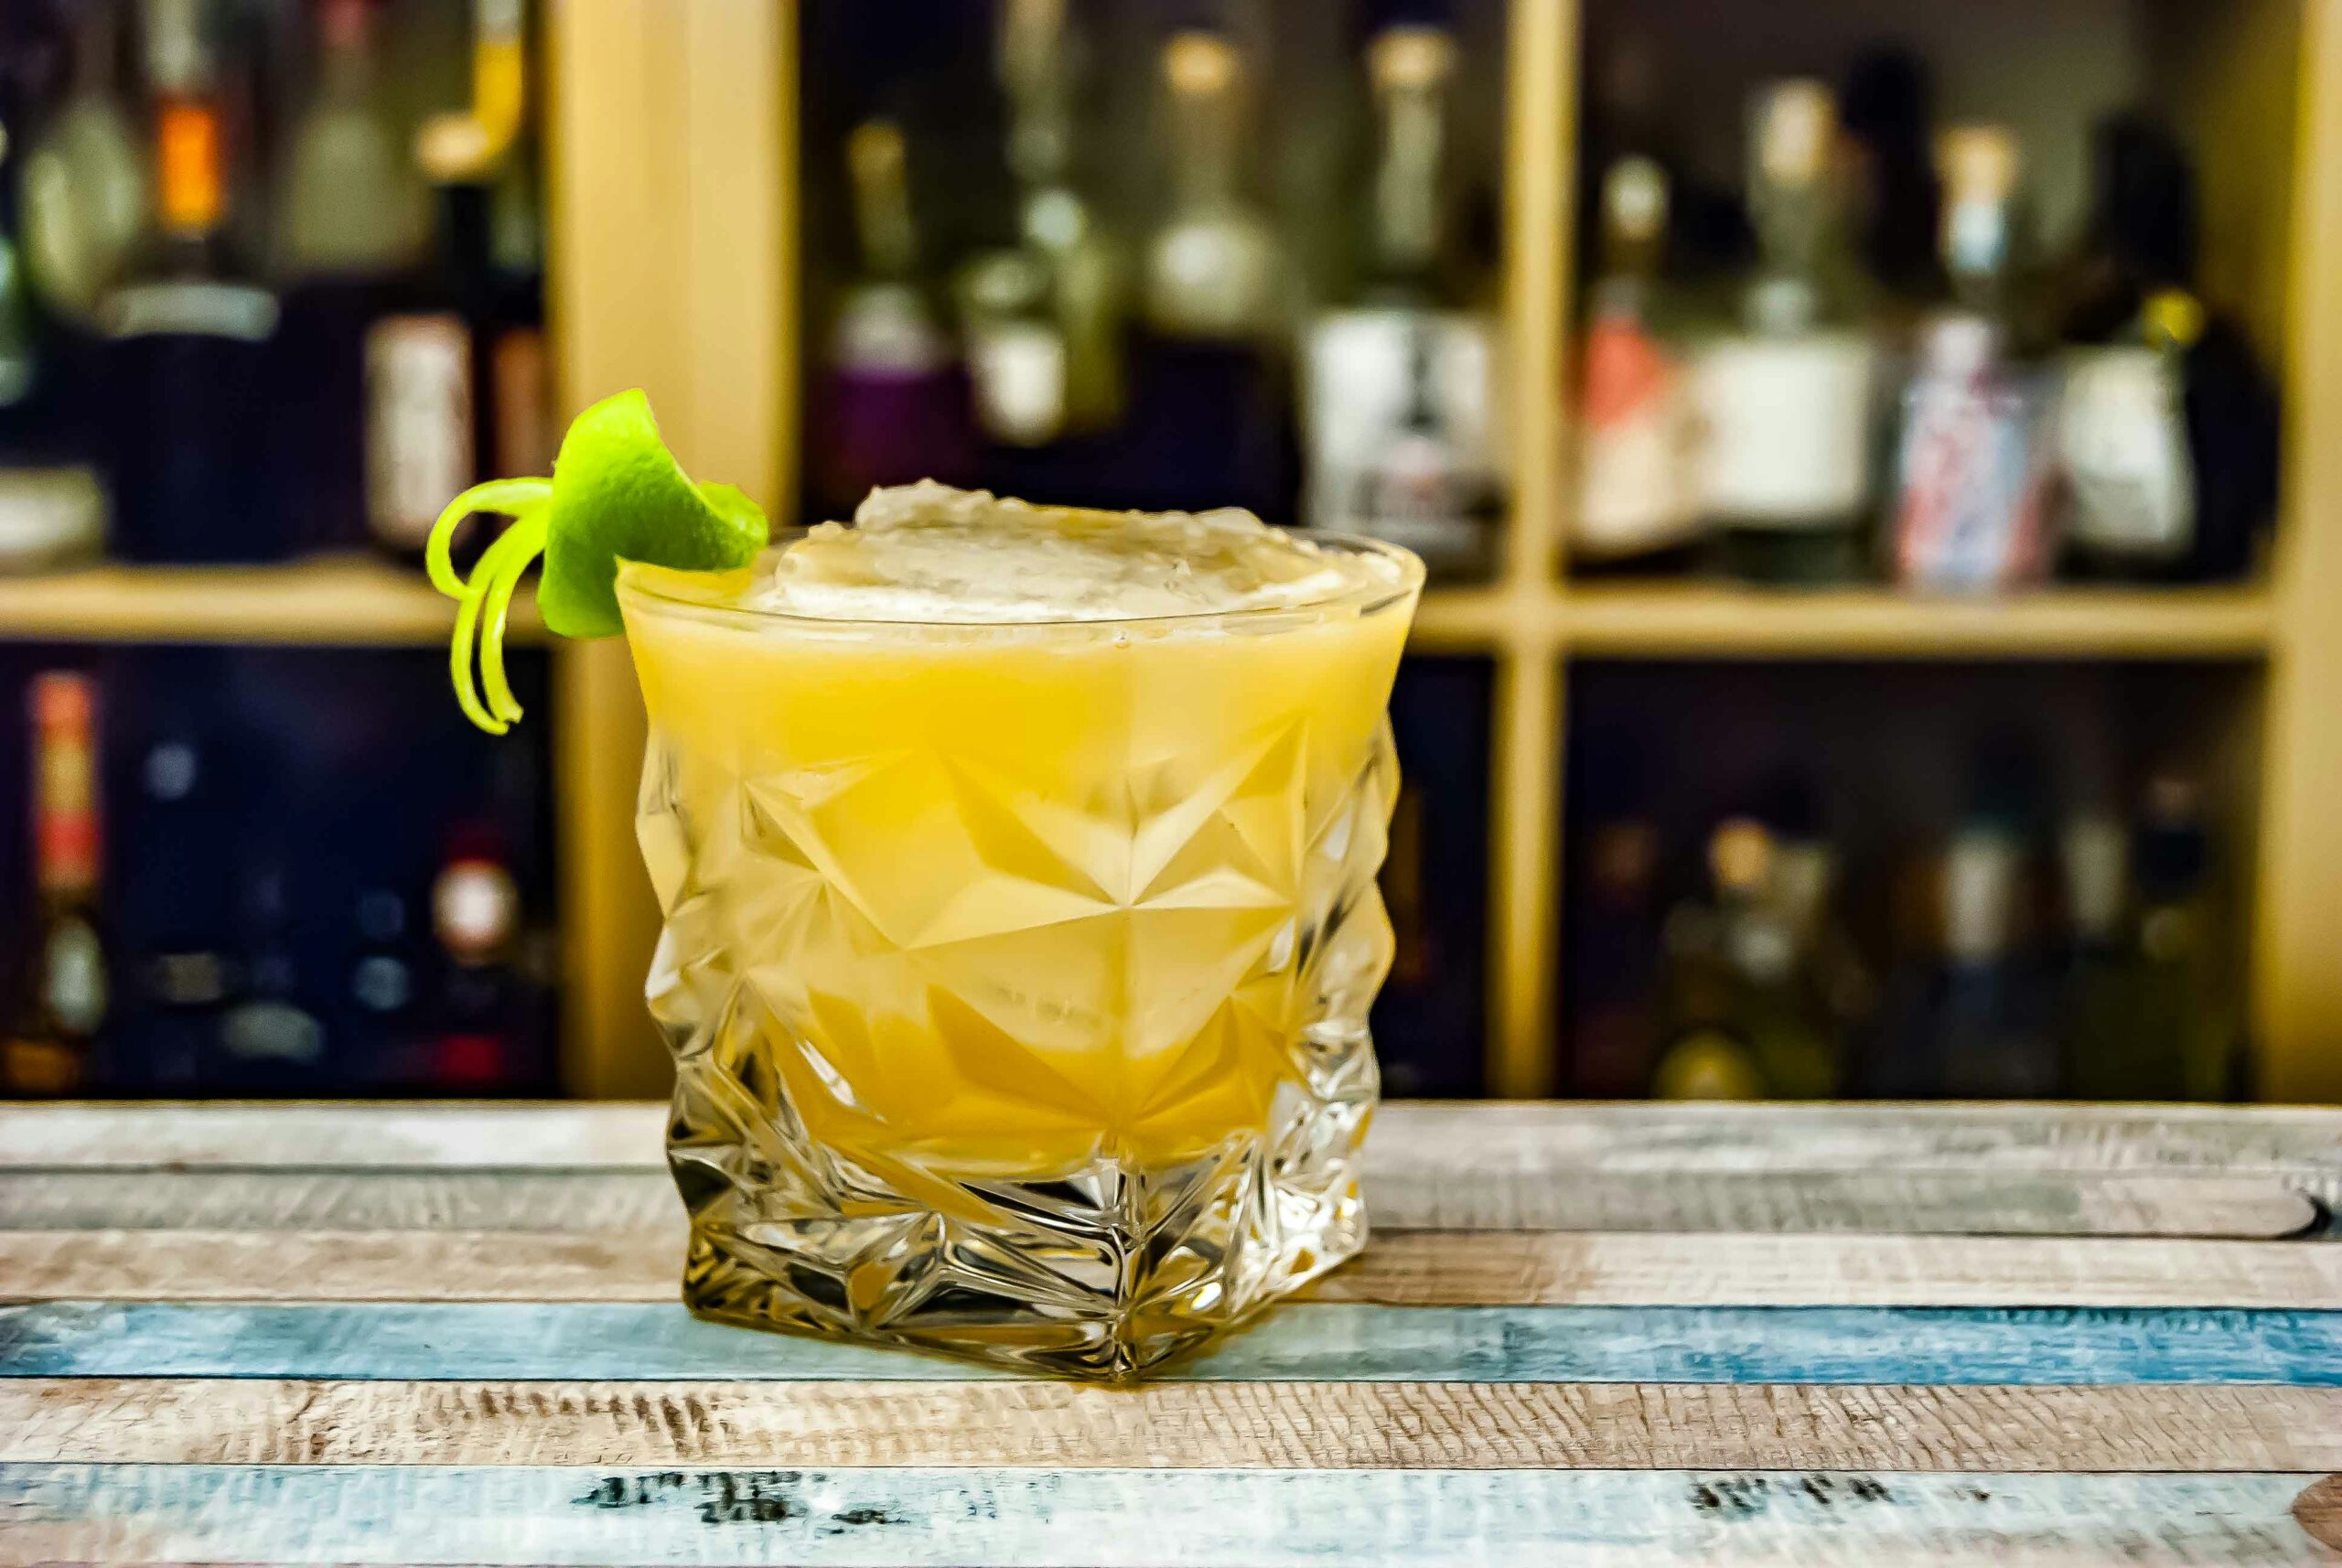 There are so many different combinations you can do with a simple tequila drink with two ingredients. Pictured: A tequila drink